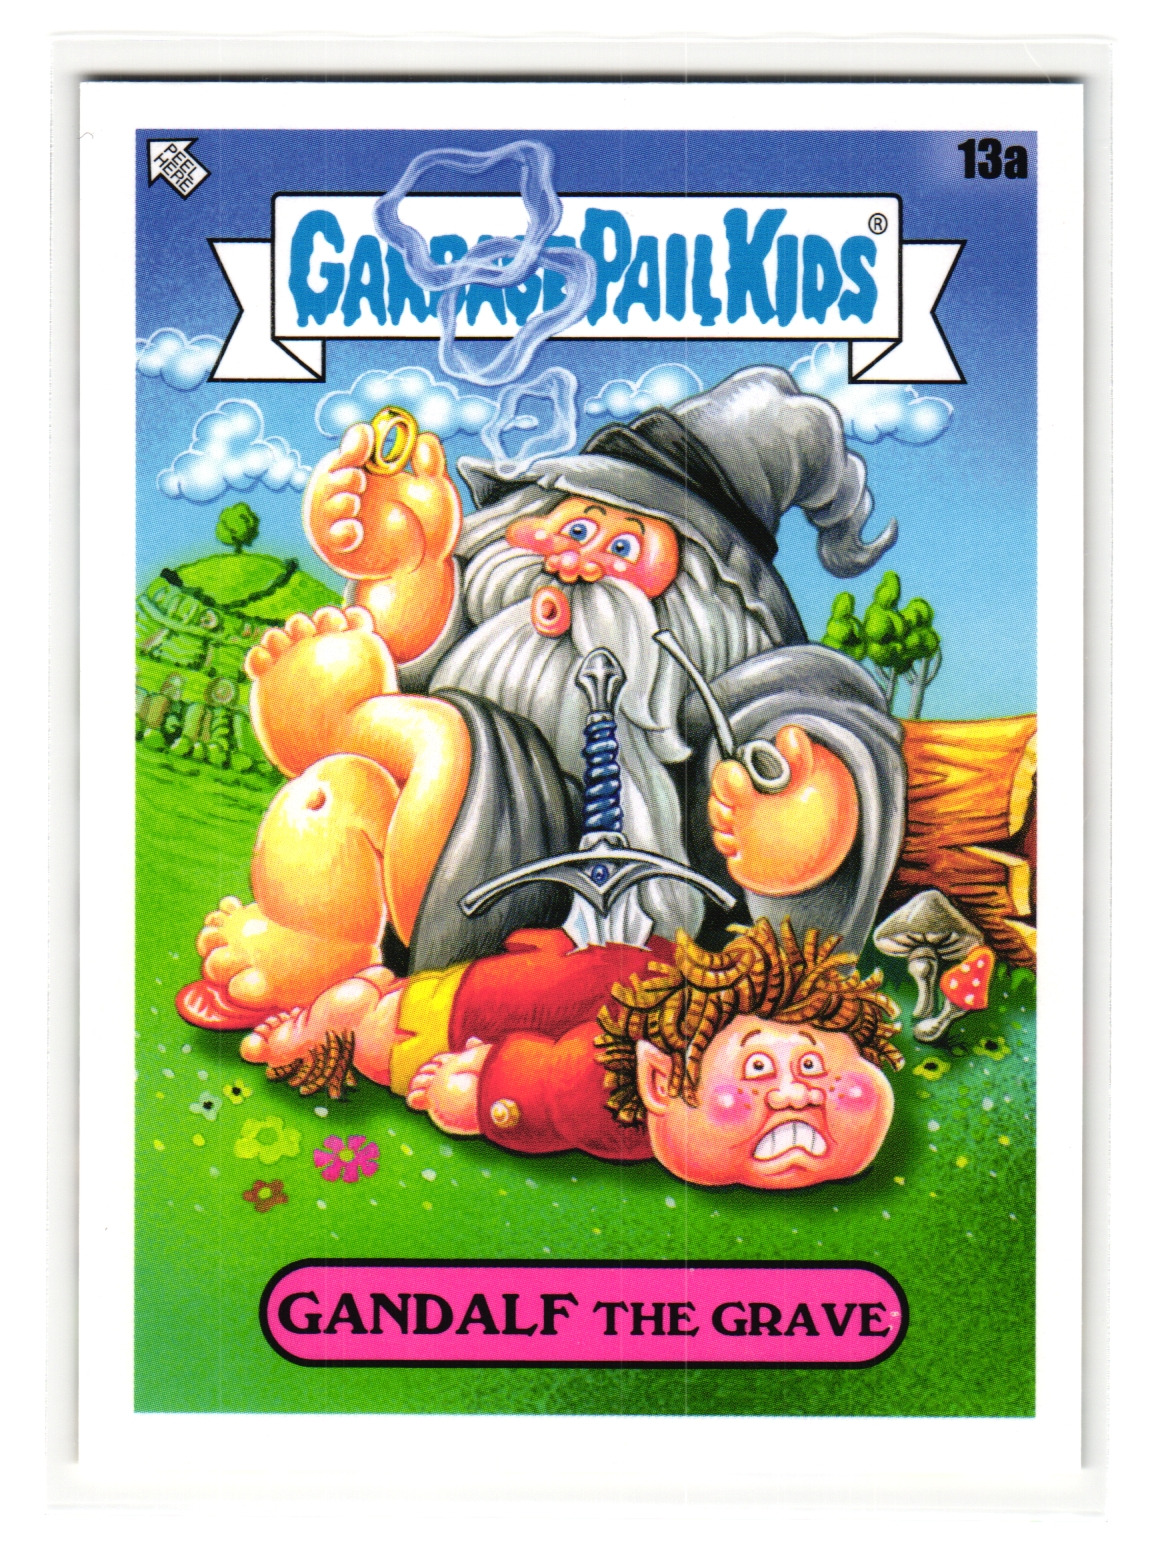 Gandalf The Grave 2022 Garbage Pail Kids Book Worms Parody Card 13a